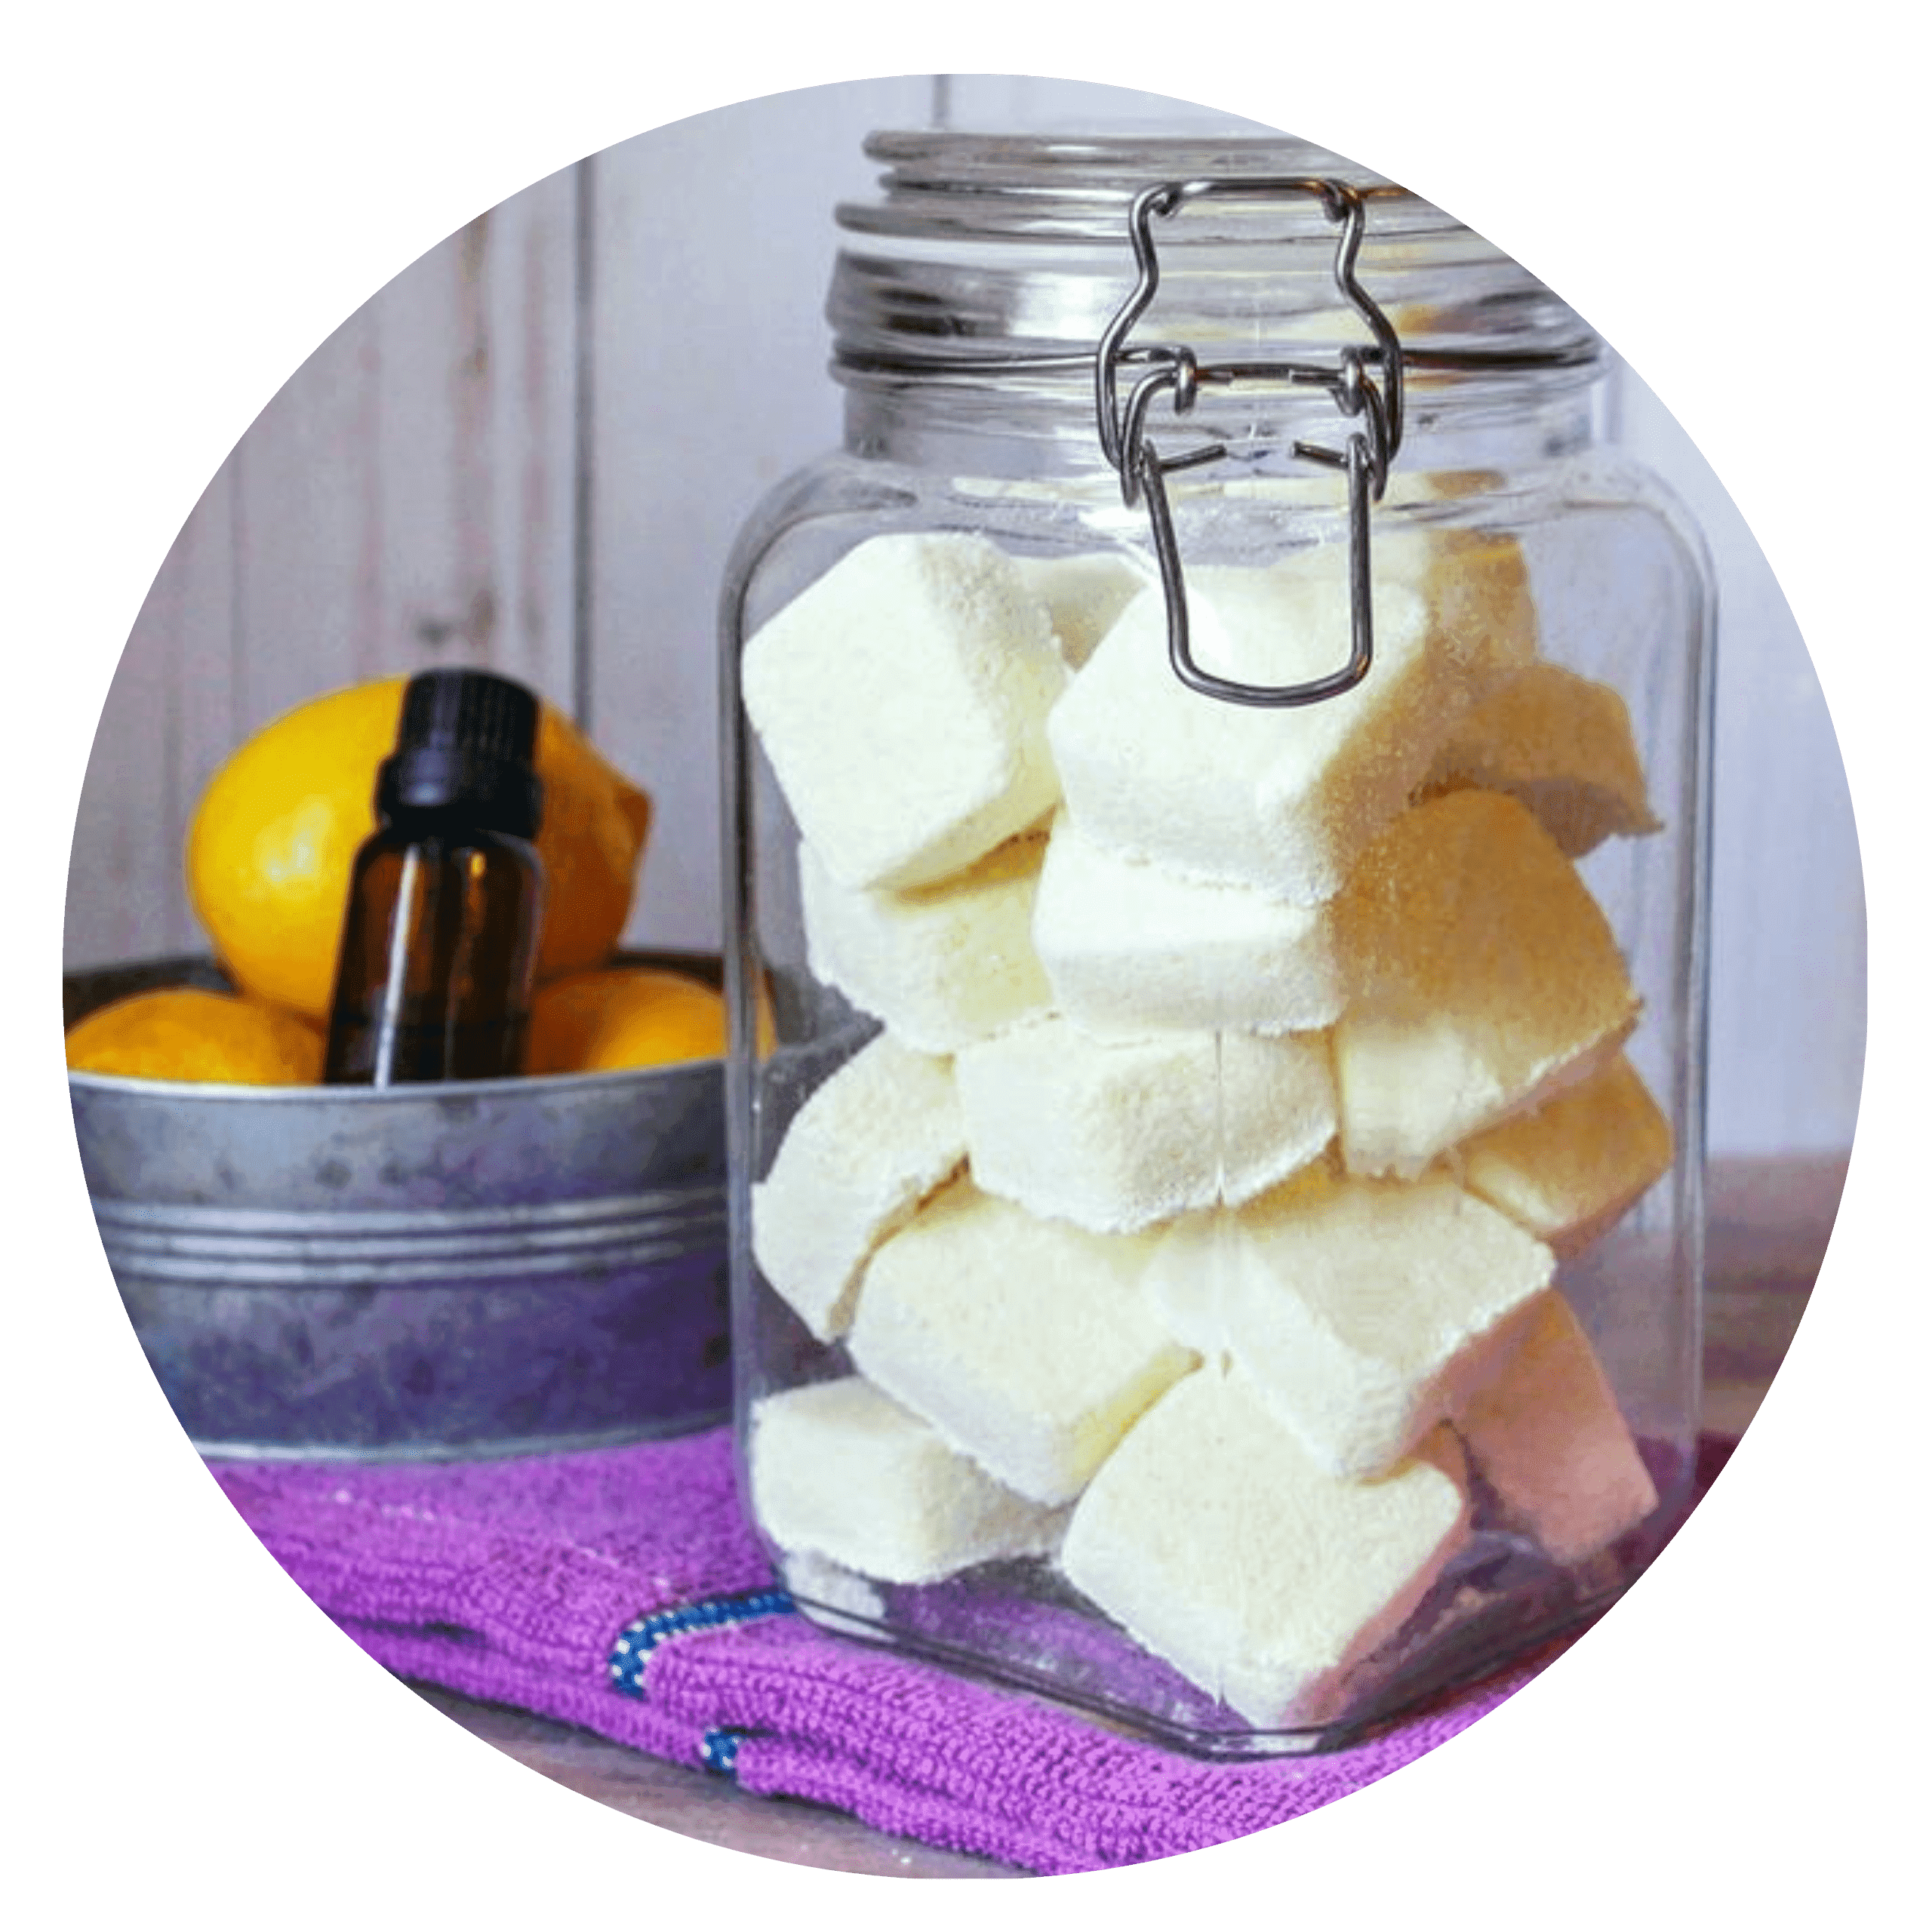 Graphic of homemade dishwasher tablets